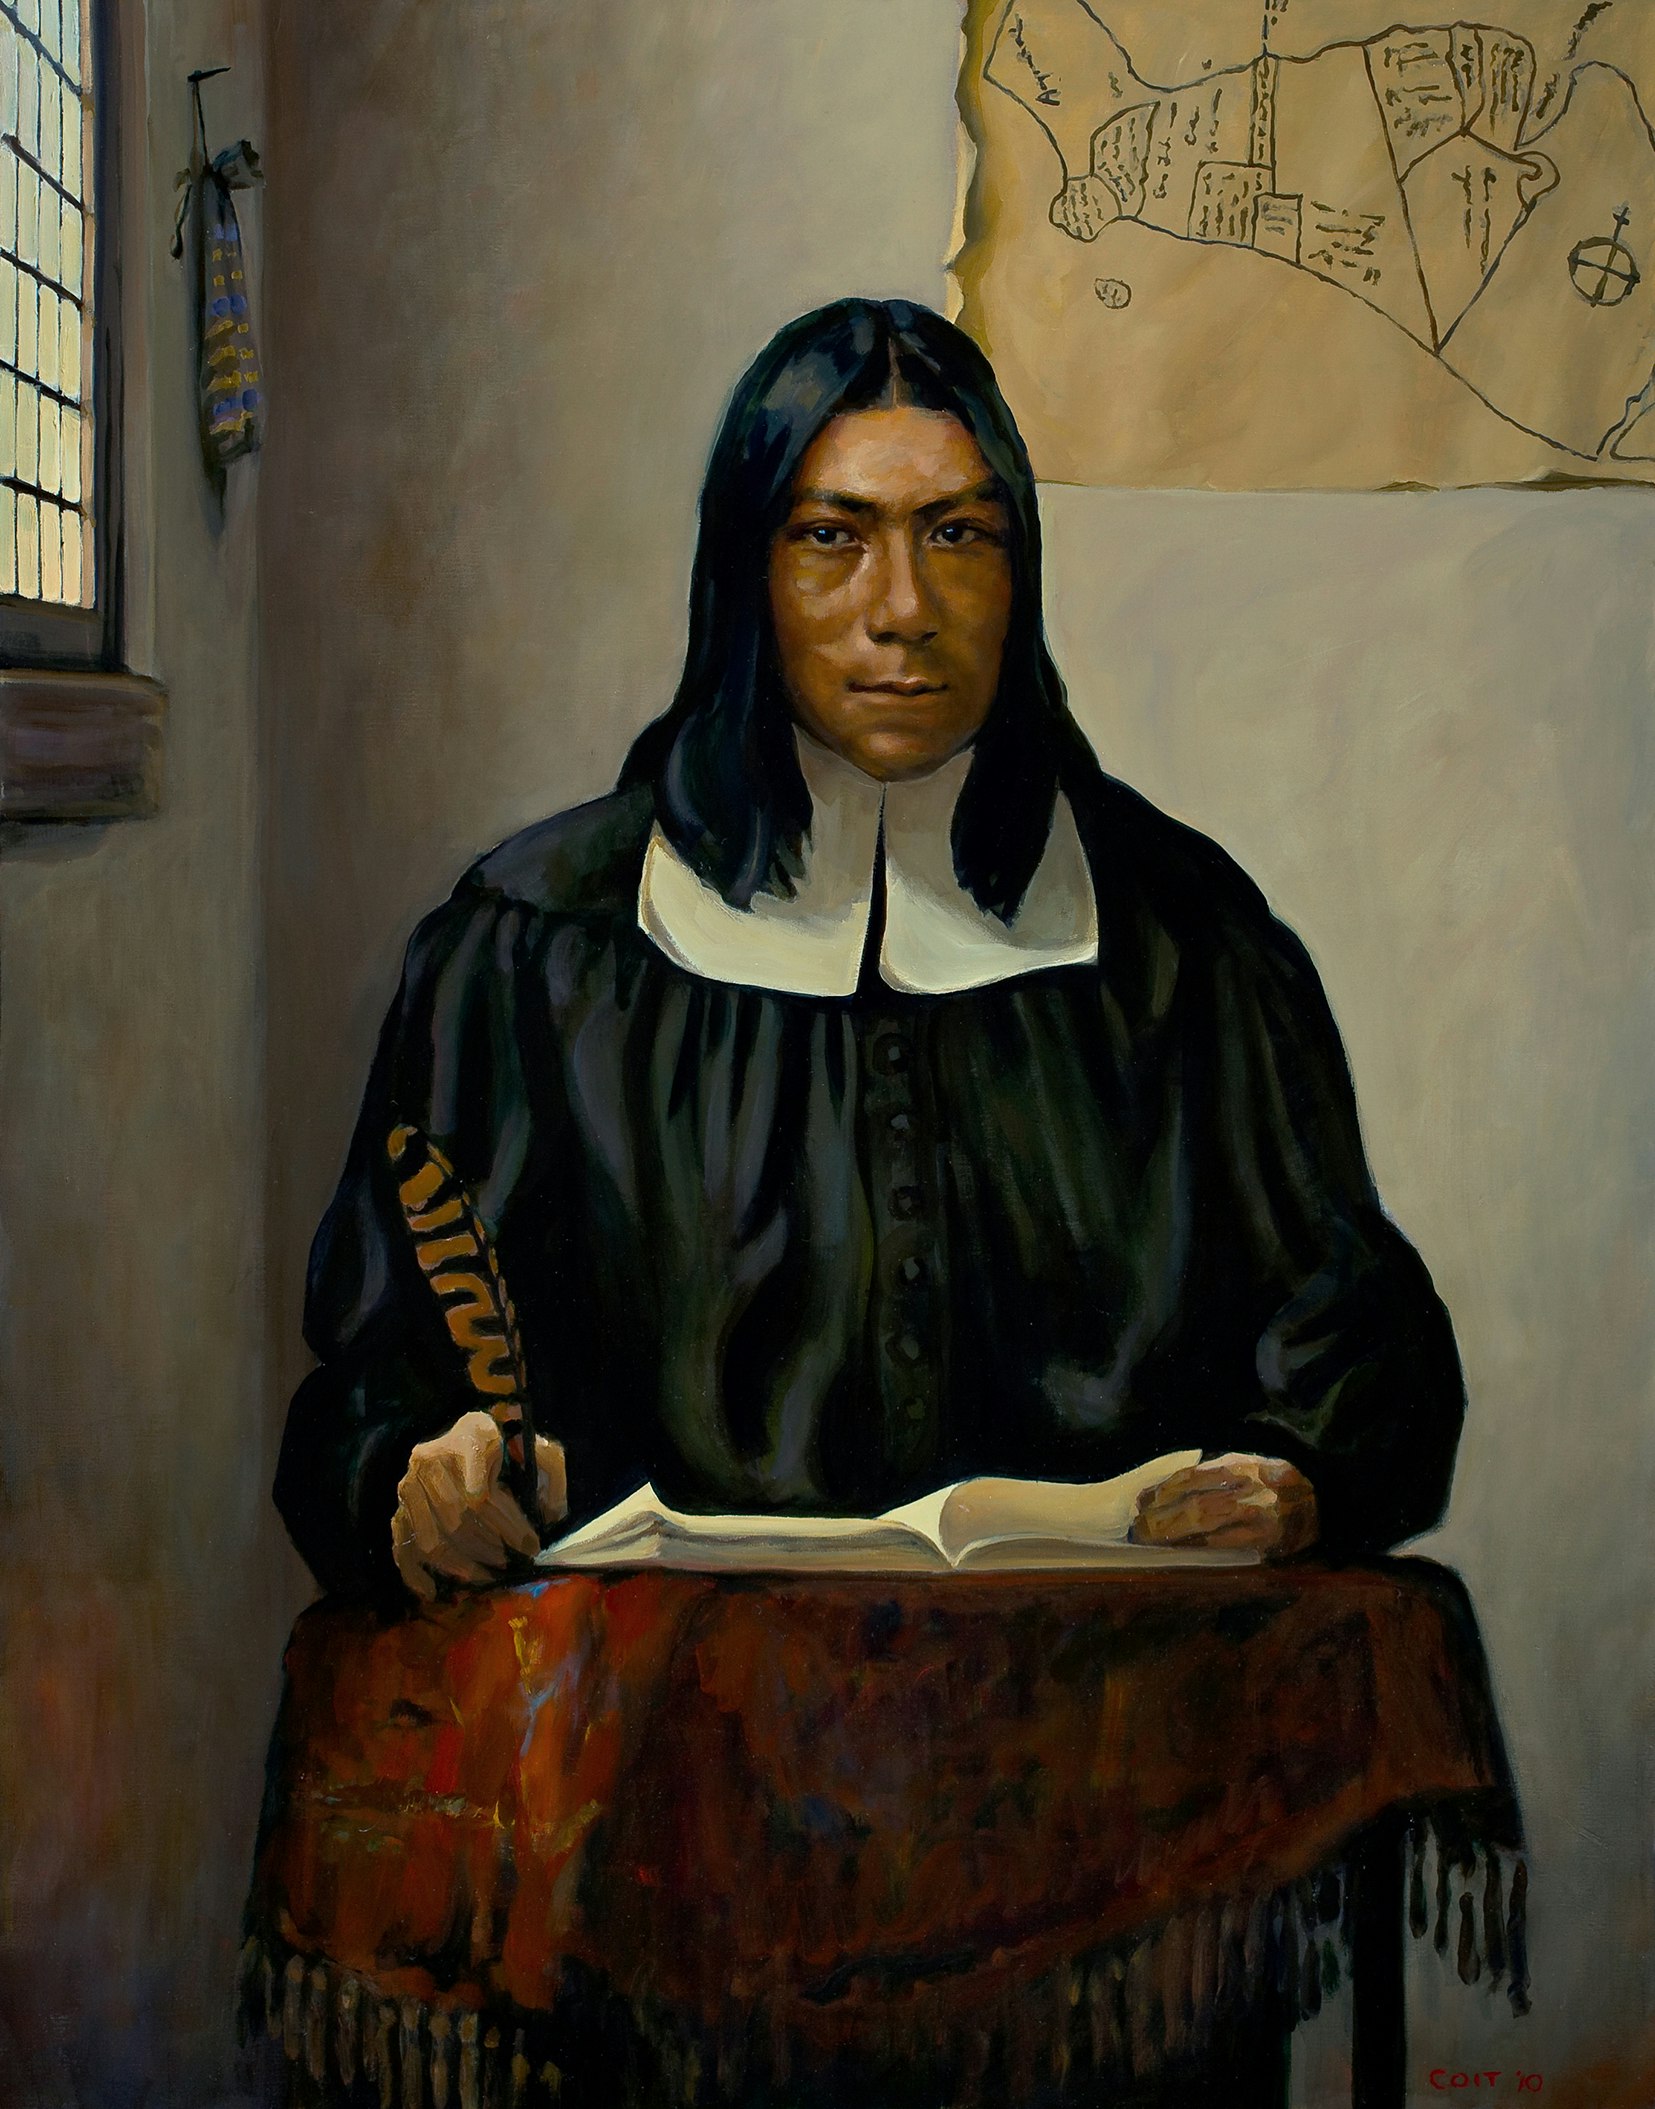 Painting of Caleb Cheeshahteaumuck, standing at a table with quill in hand, wearing a black robe with a white collar.